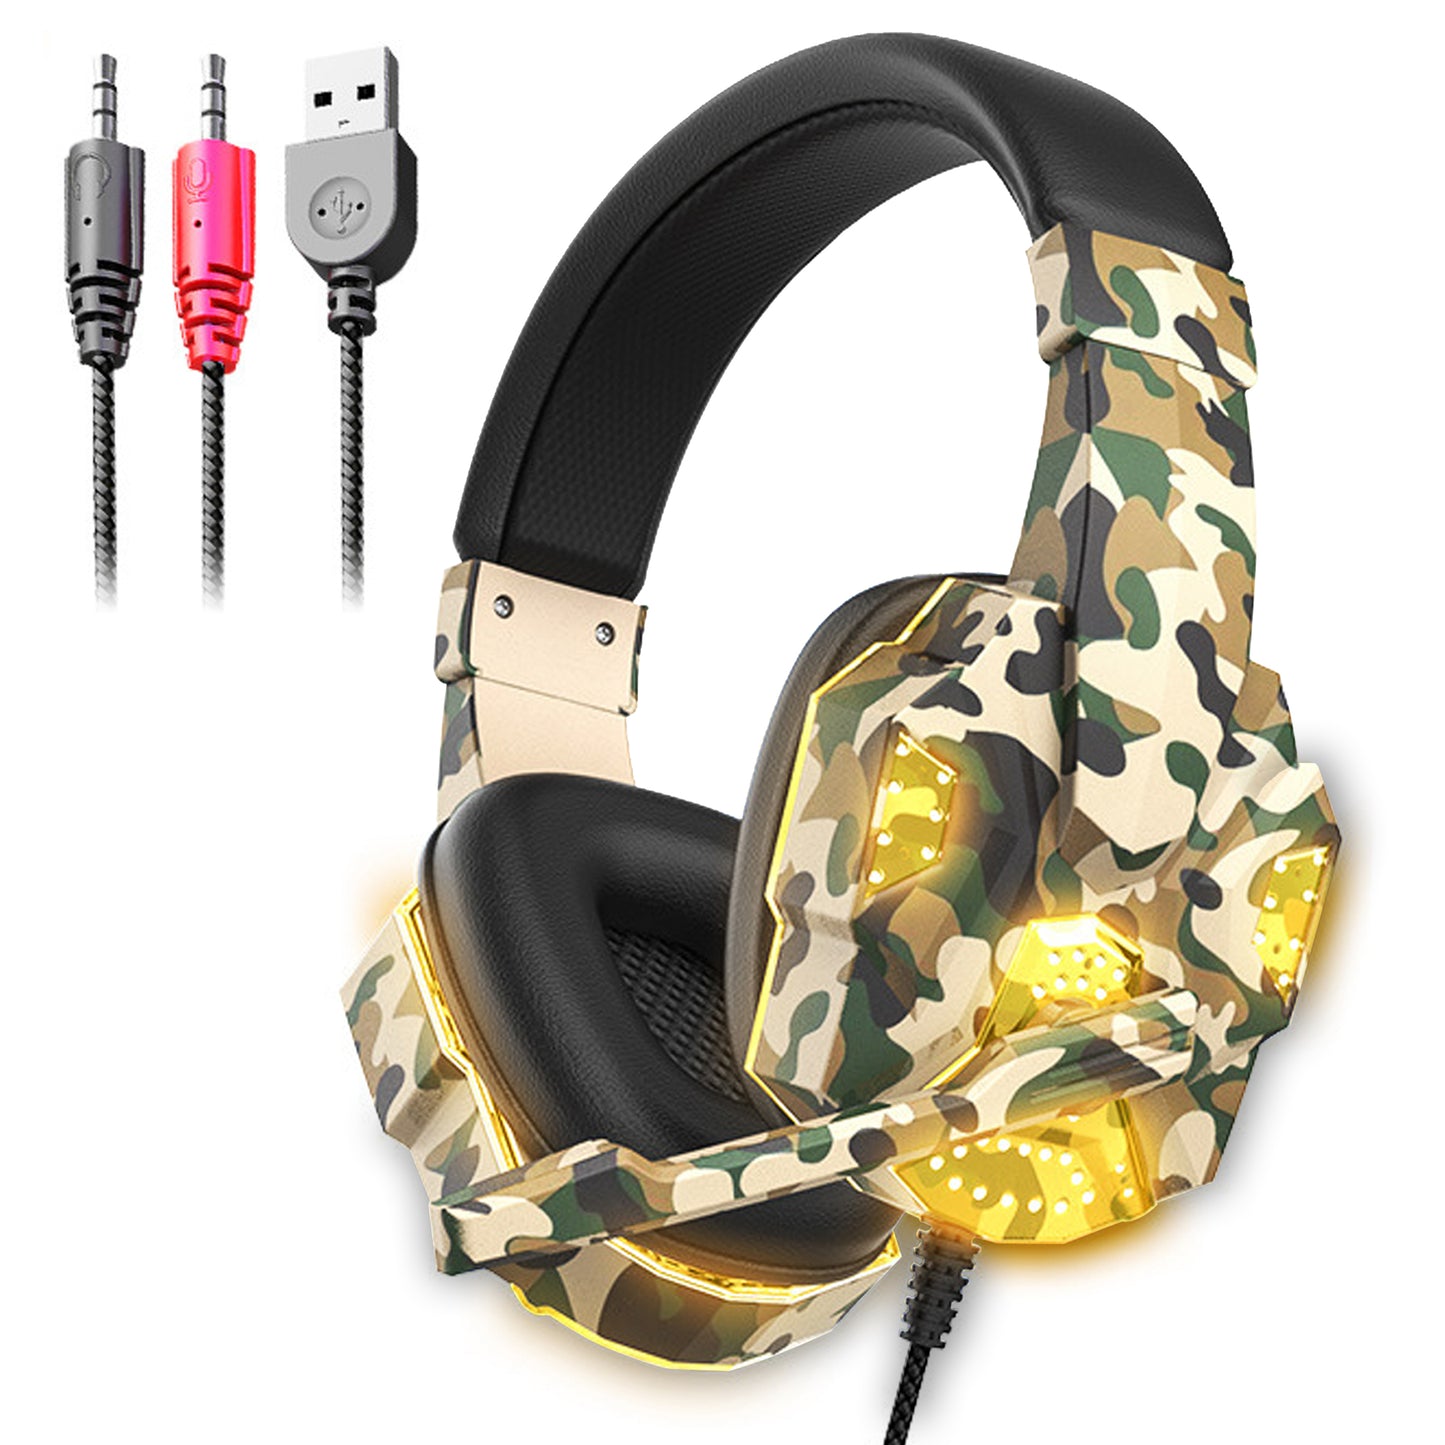 3.5mm Wired Over-Ear Headphones - with 7.1 Surround Sound, PC Headset with Noise Canceling Mic & LED Light, H3 Over Ear Headphones for Nintendo Switch, PS5, Xbox One, Laptop (Camo Yellow)